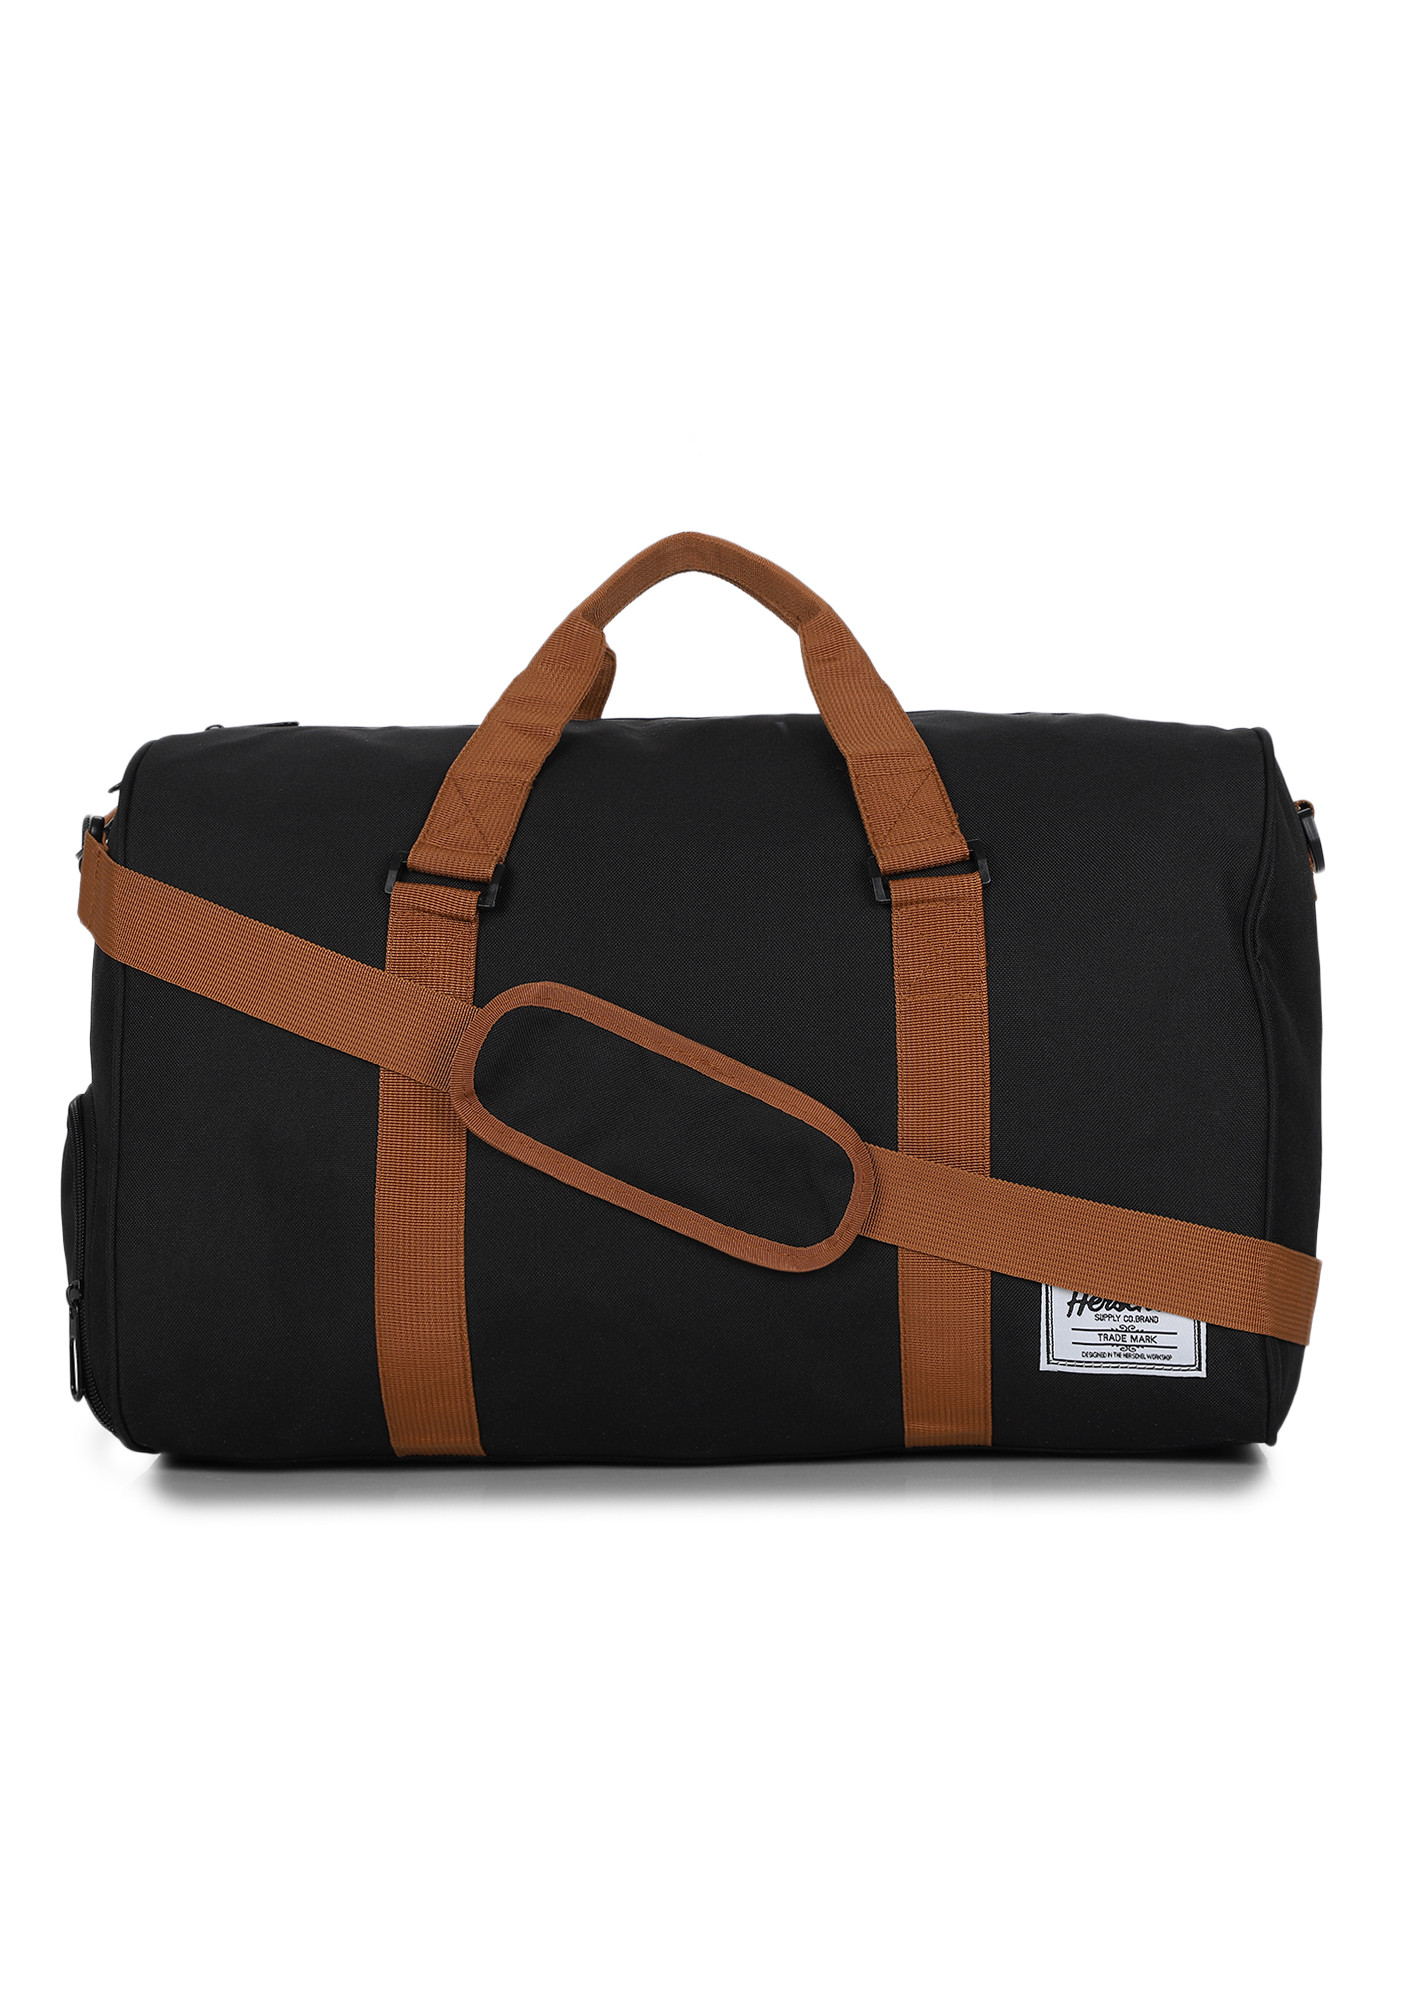 WORK IT OUT BLACK DUFFLE BAG